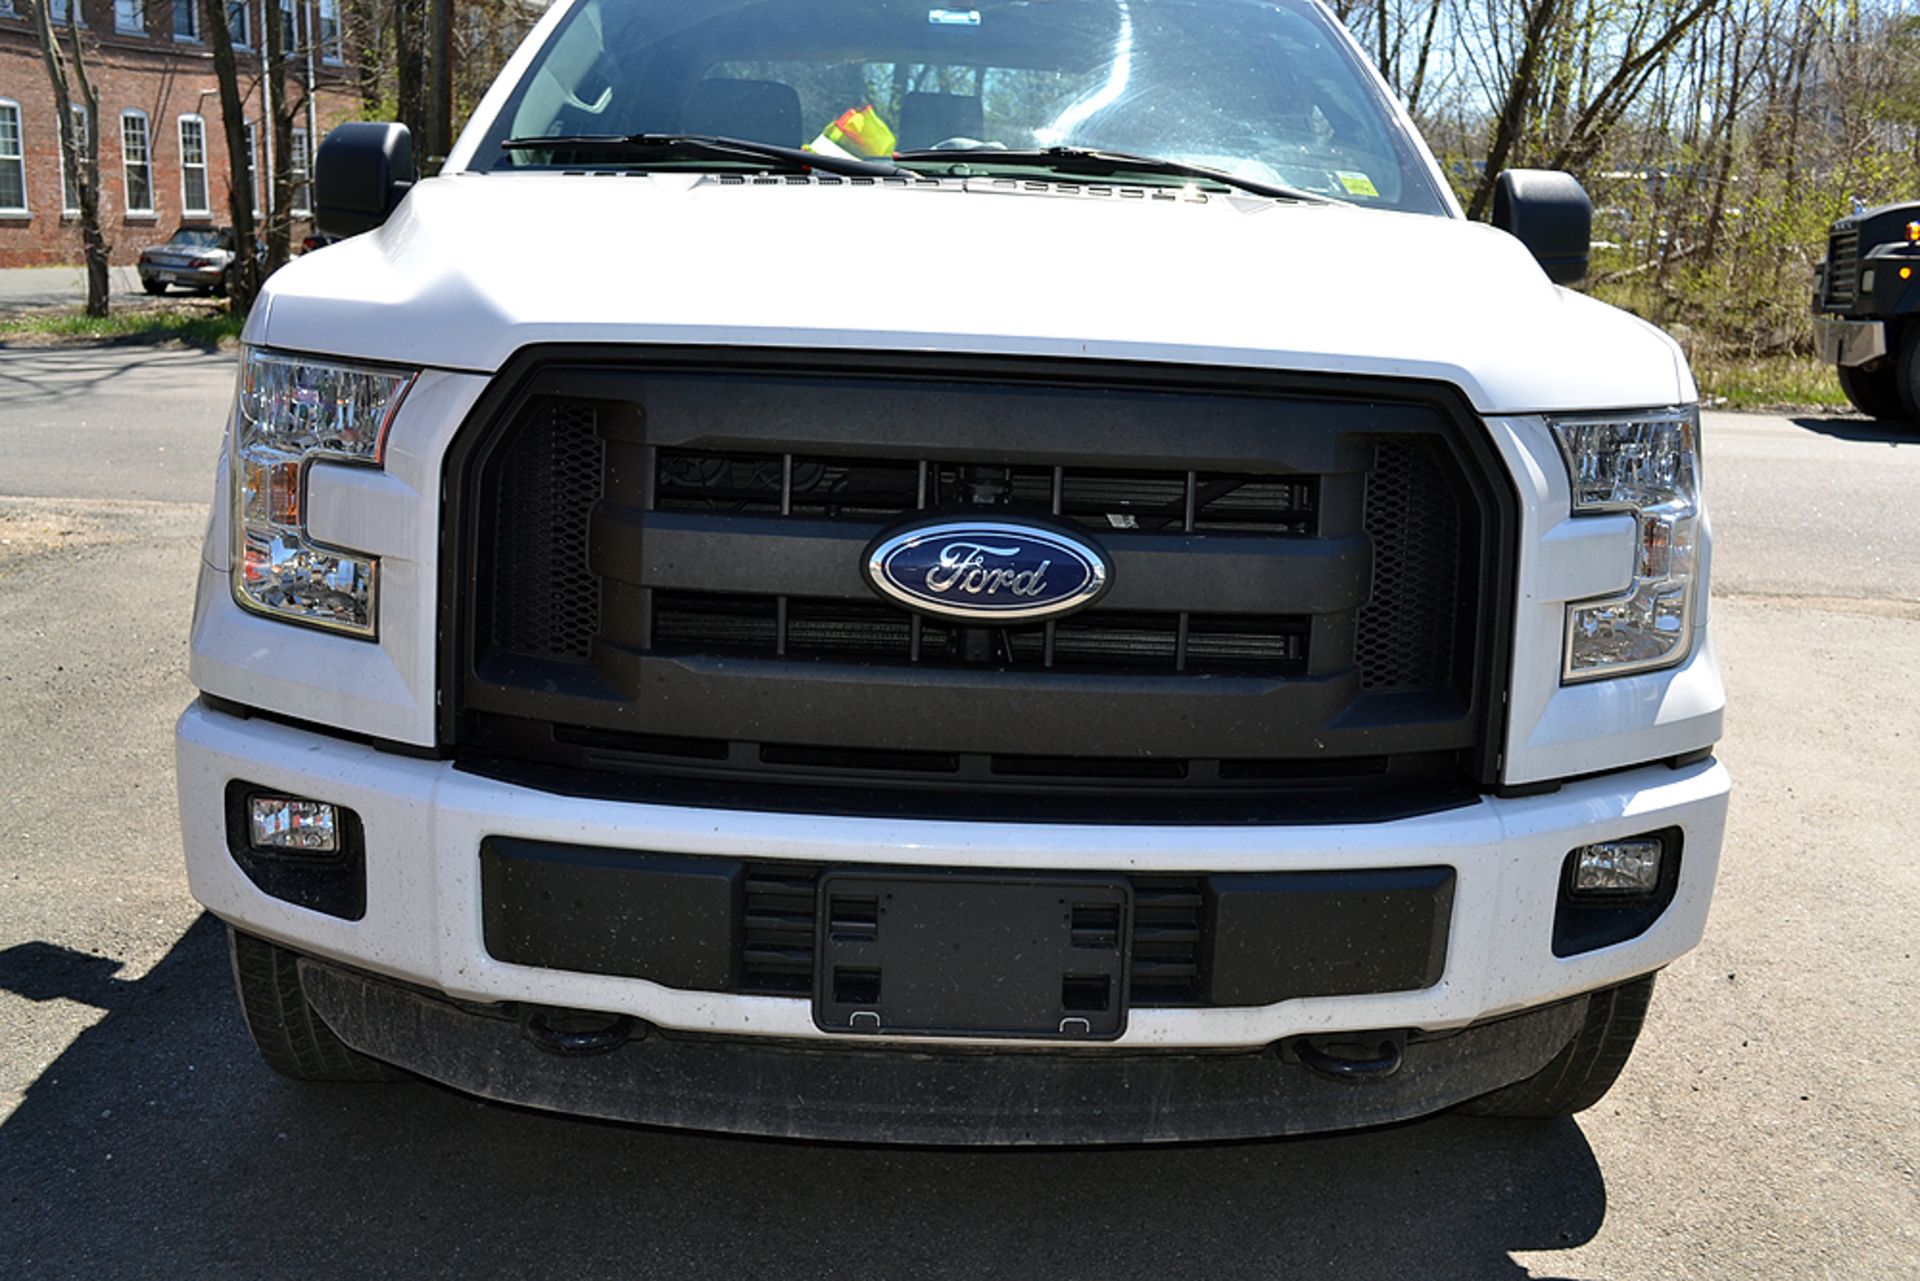 2015 Ford F150 Lariat SuperCab, 4WD Pick Up Truck - Image 6 of 11